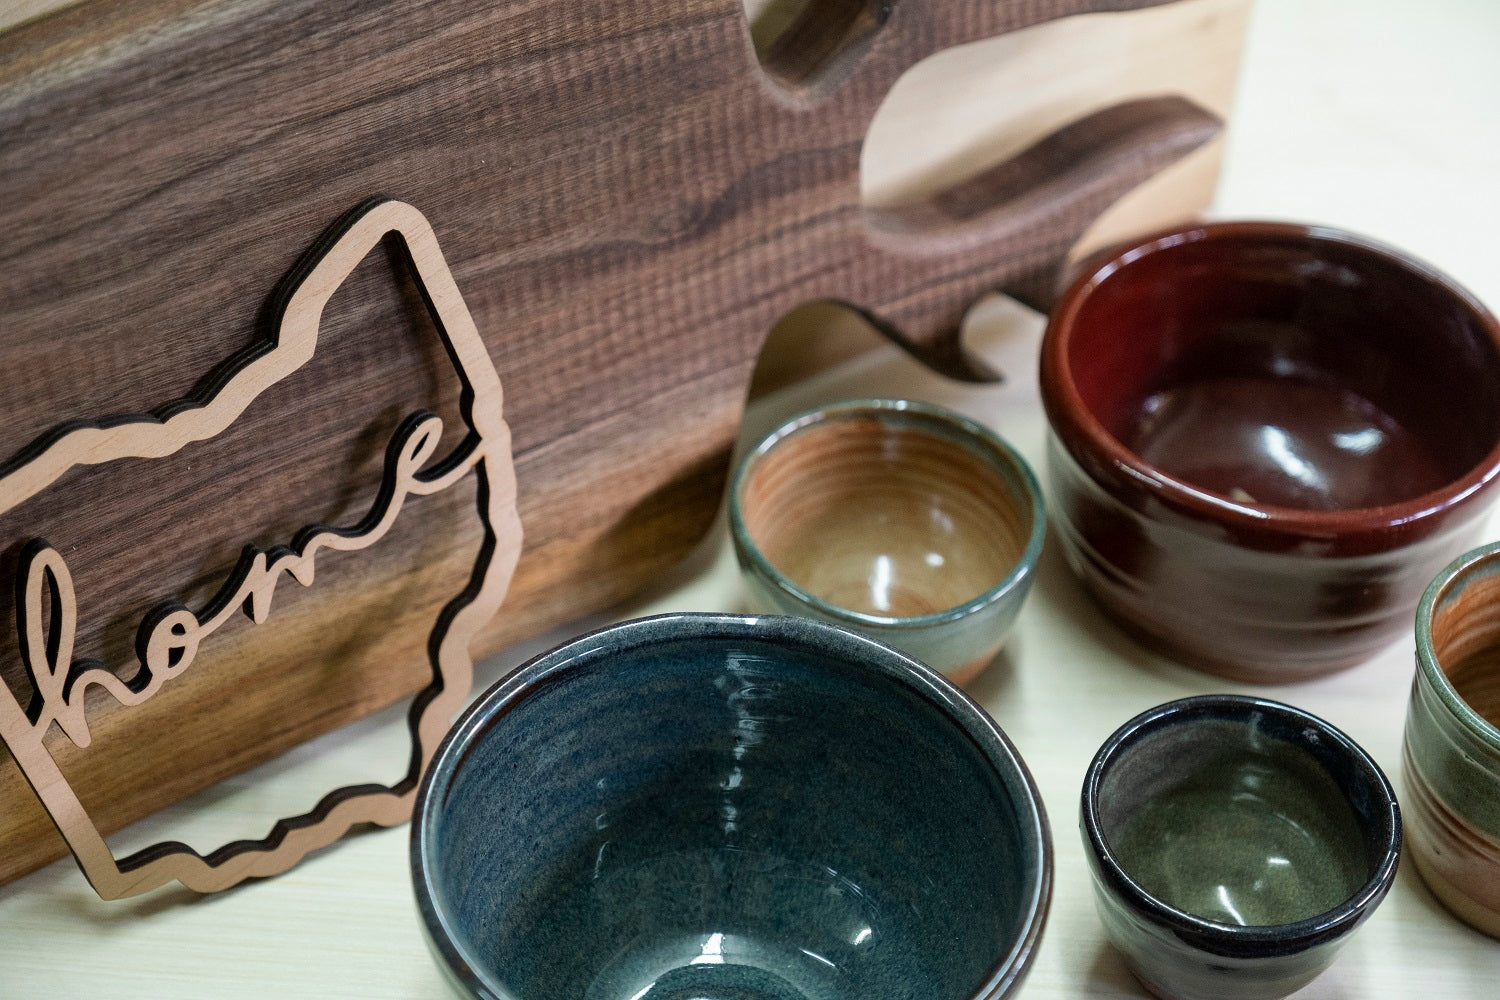 Wood pottery and laser cut goods